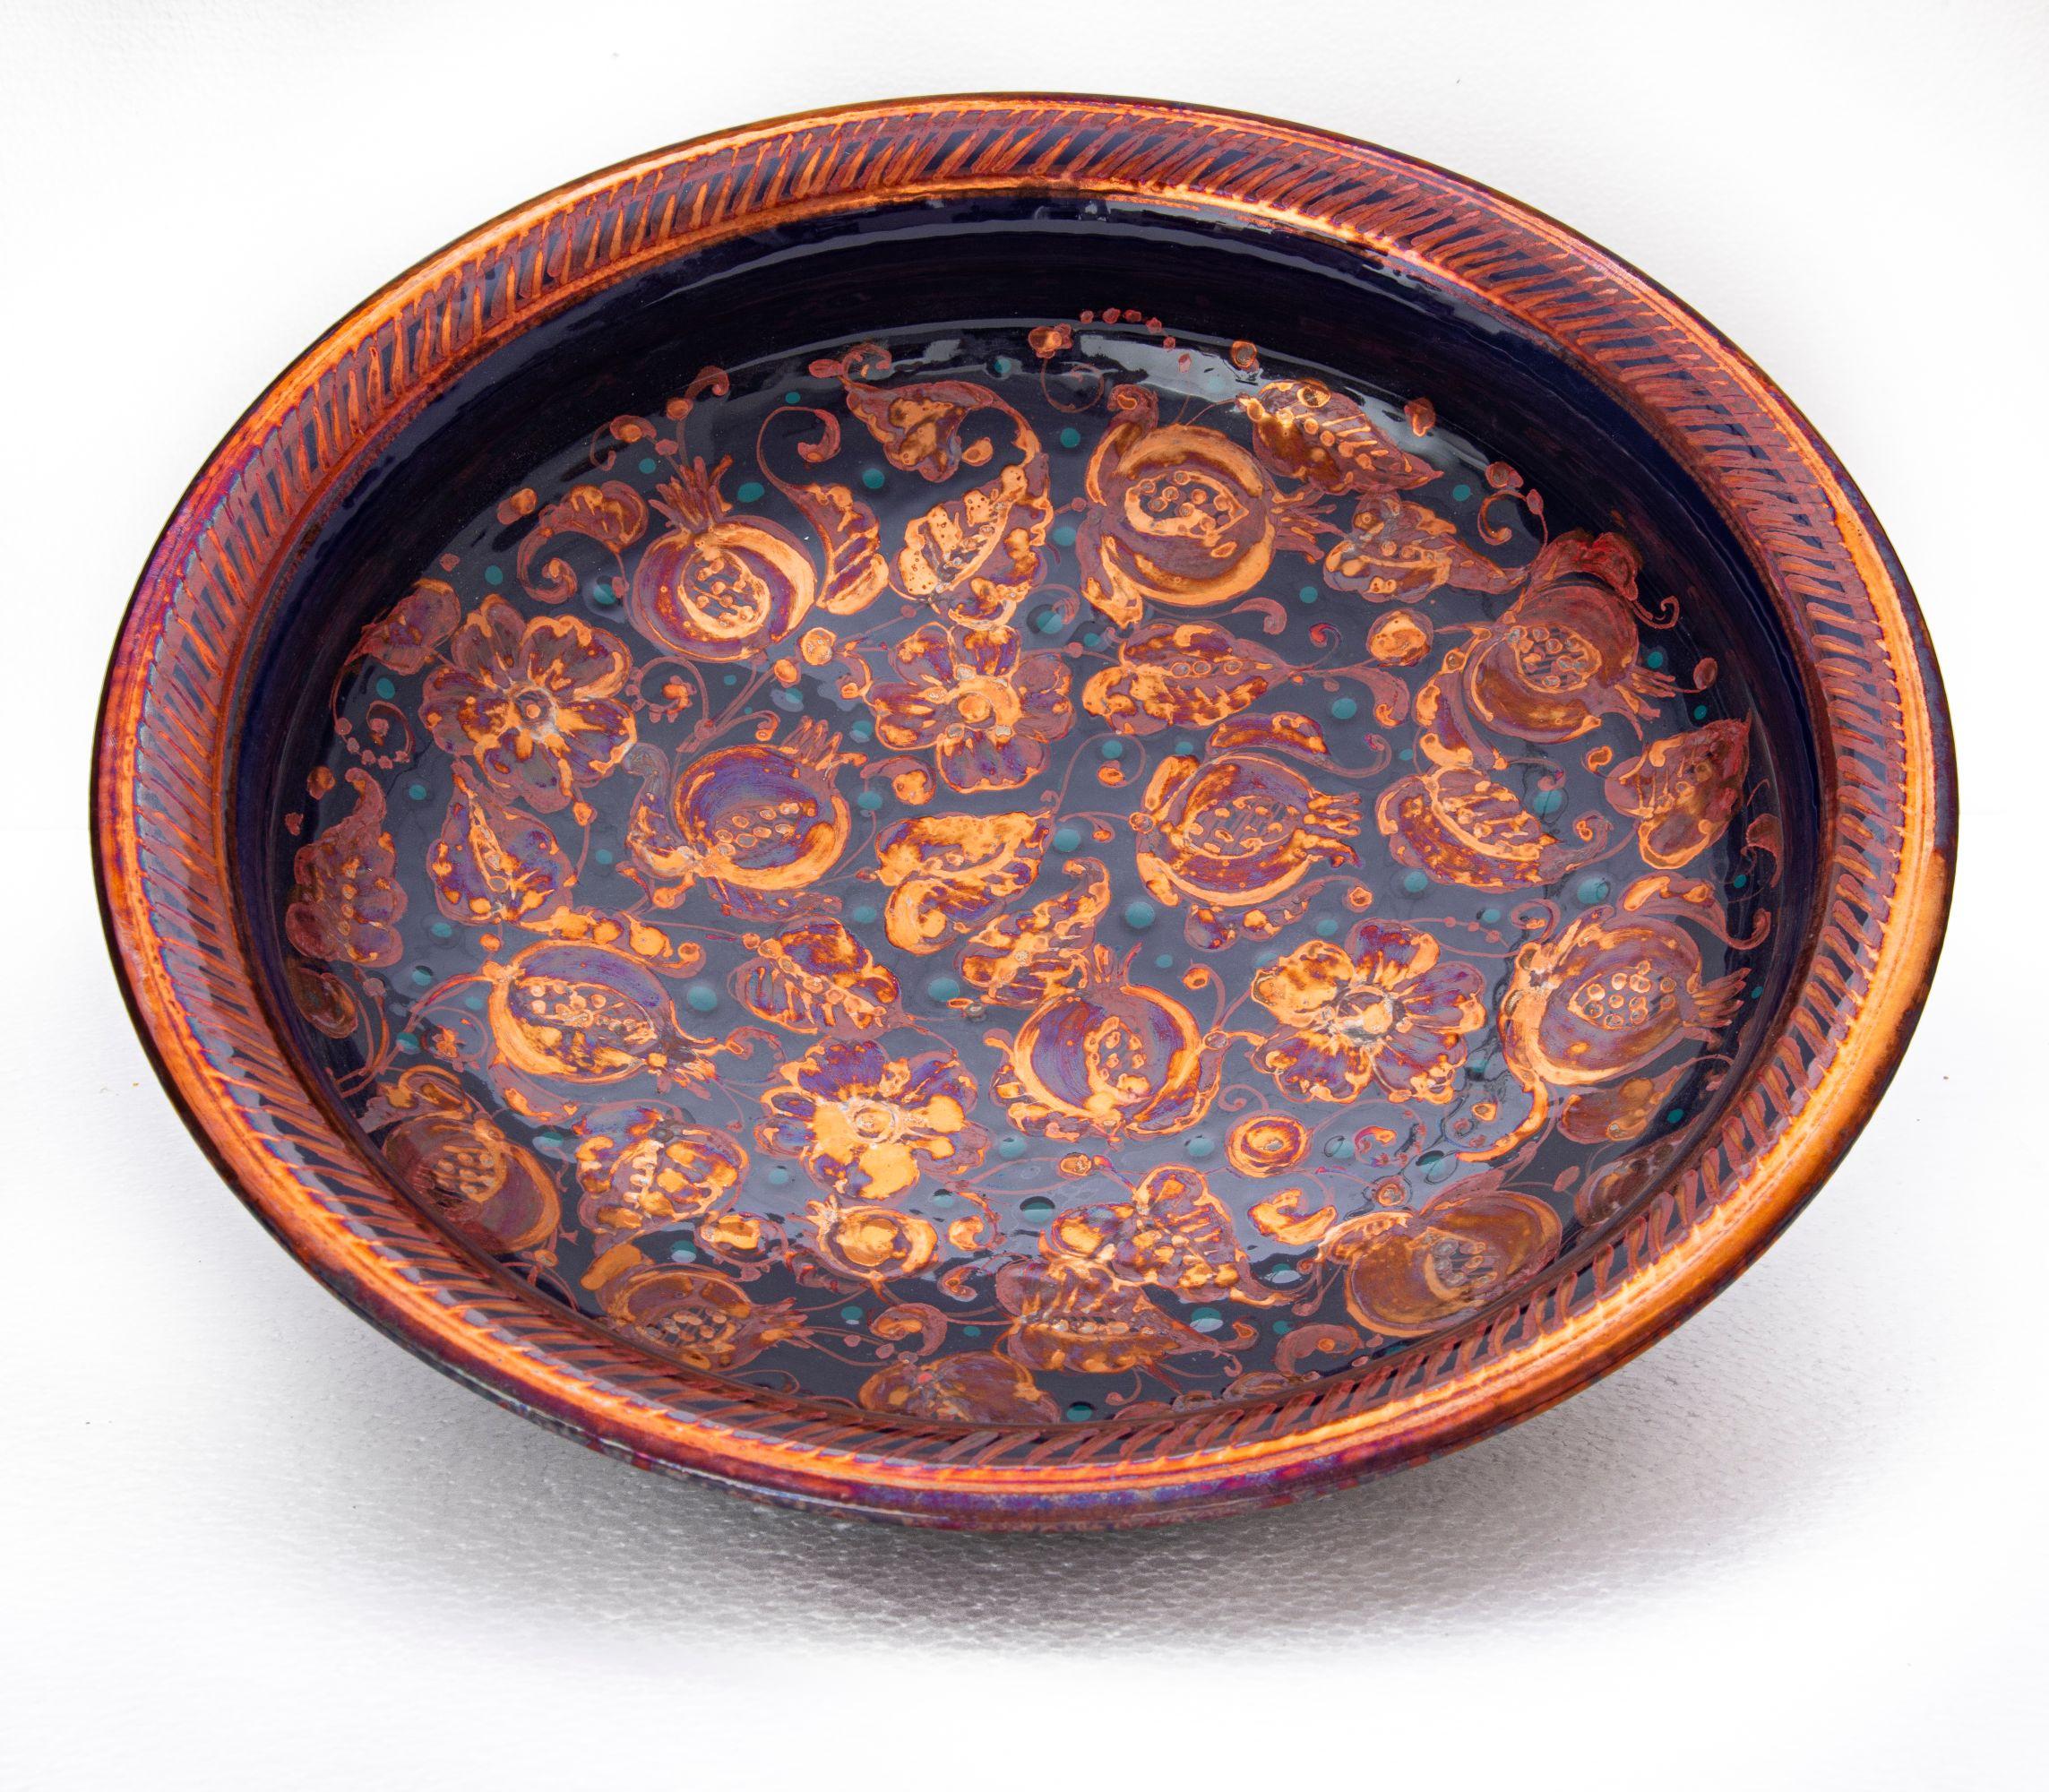 Large bowl with pomegranate decor, full-fire reduction faience earthenware 40 cm diameter, unique piece, 2020

Bottega Vignoli is a brand of artistic ceramics based in Faenza, one of the most representative ceramic production centers in Italy.